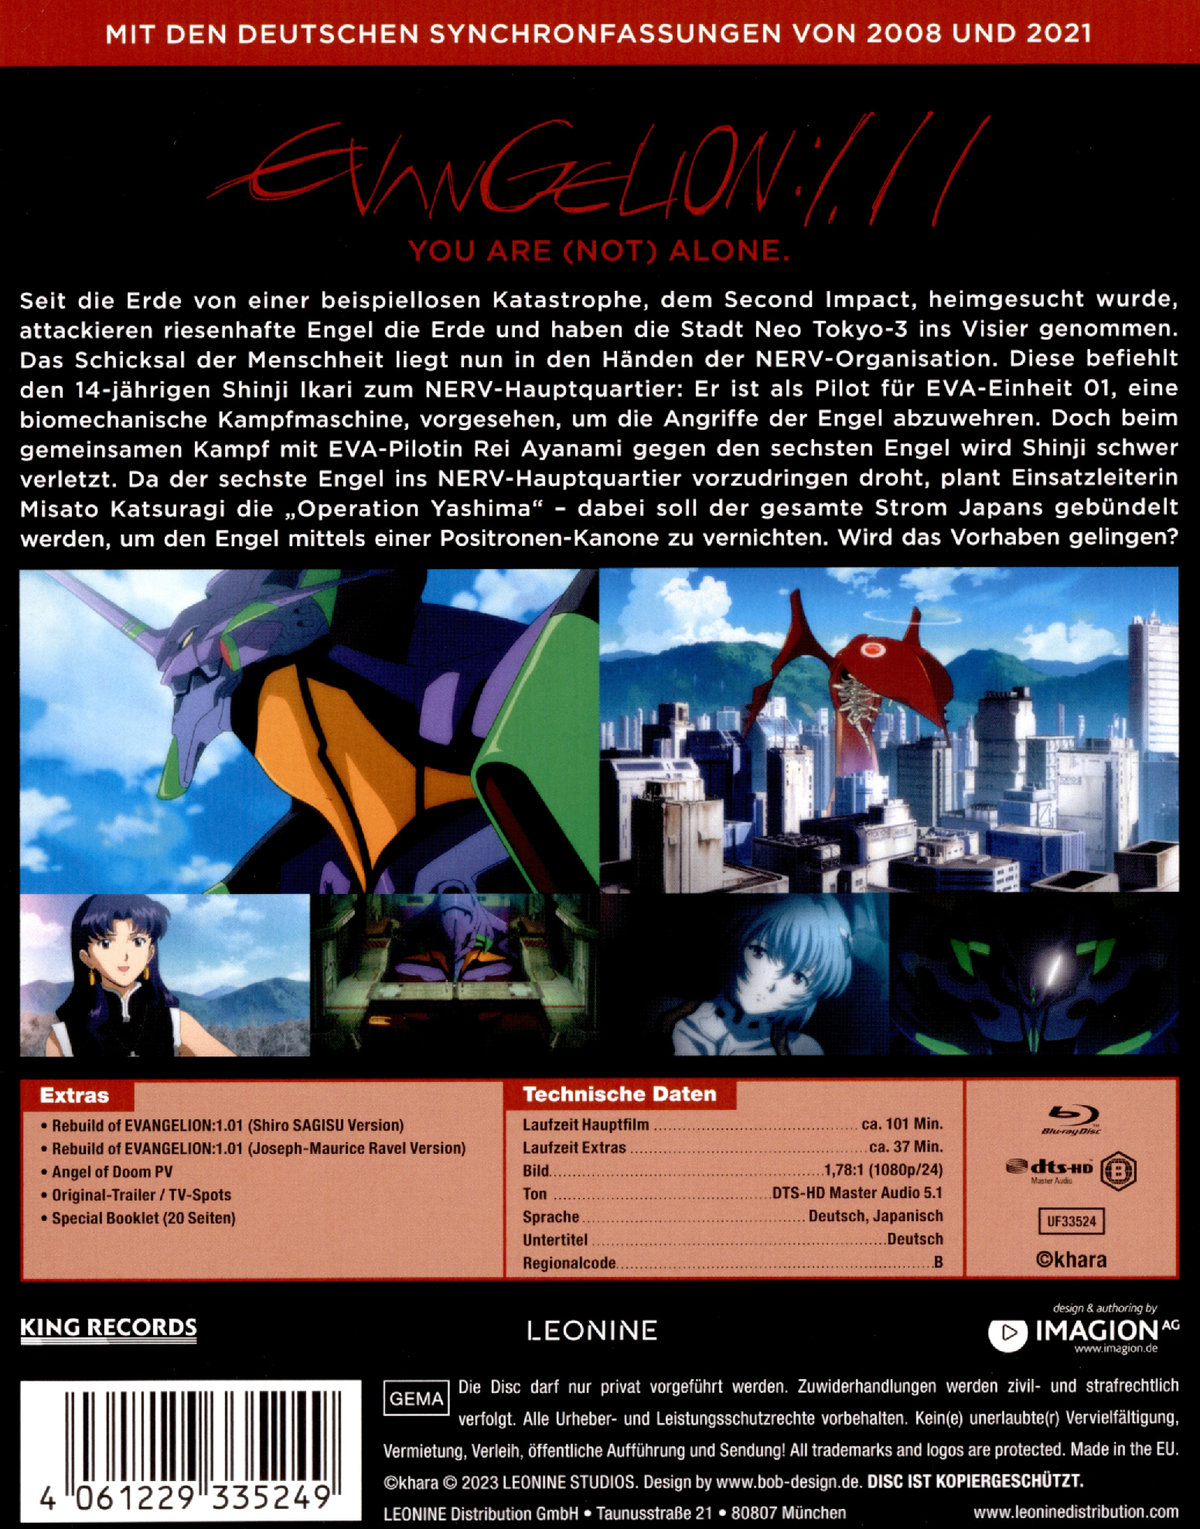 Evangelion: 1.11 - You are (not) alone - Uncut Mediabook Edition (blu-ray)